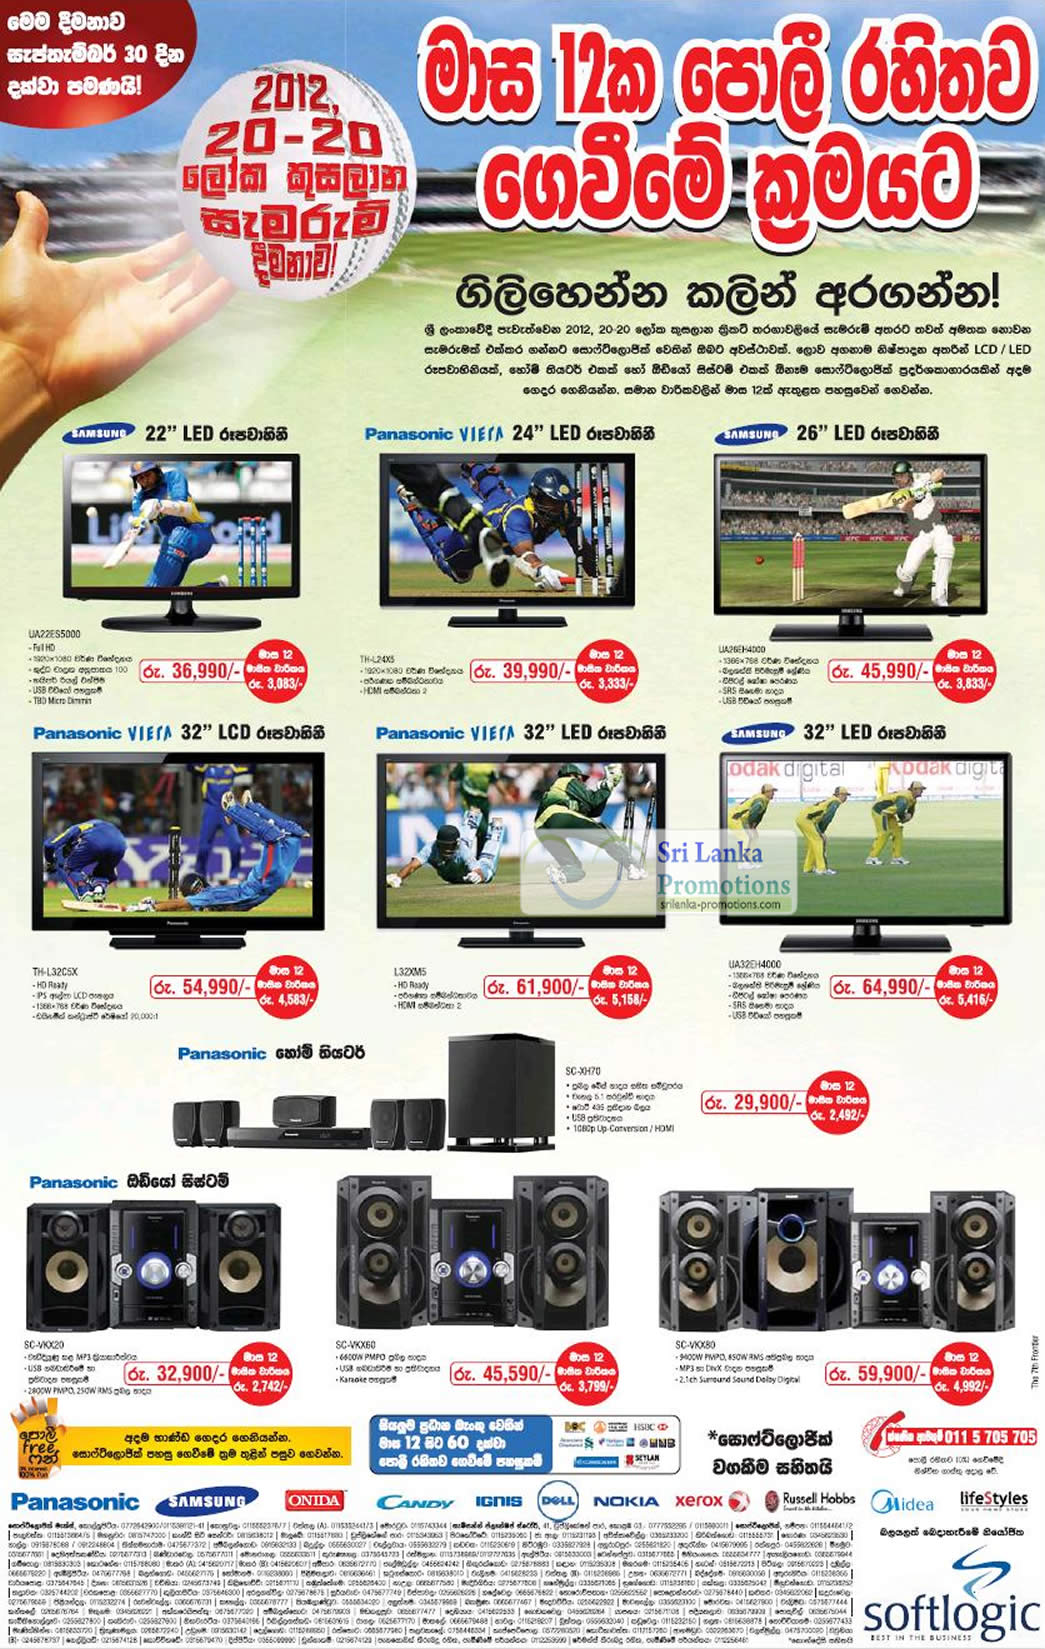 Featured image for Softlogic Panasonic Air Conditioners & Samsung TV Price Offers 9 Sep 2012